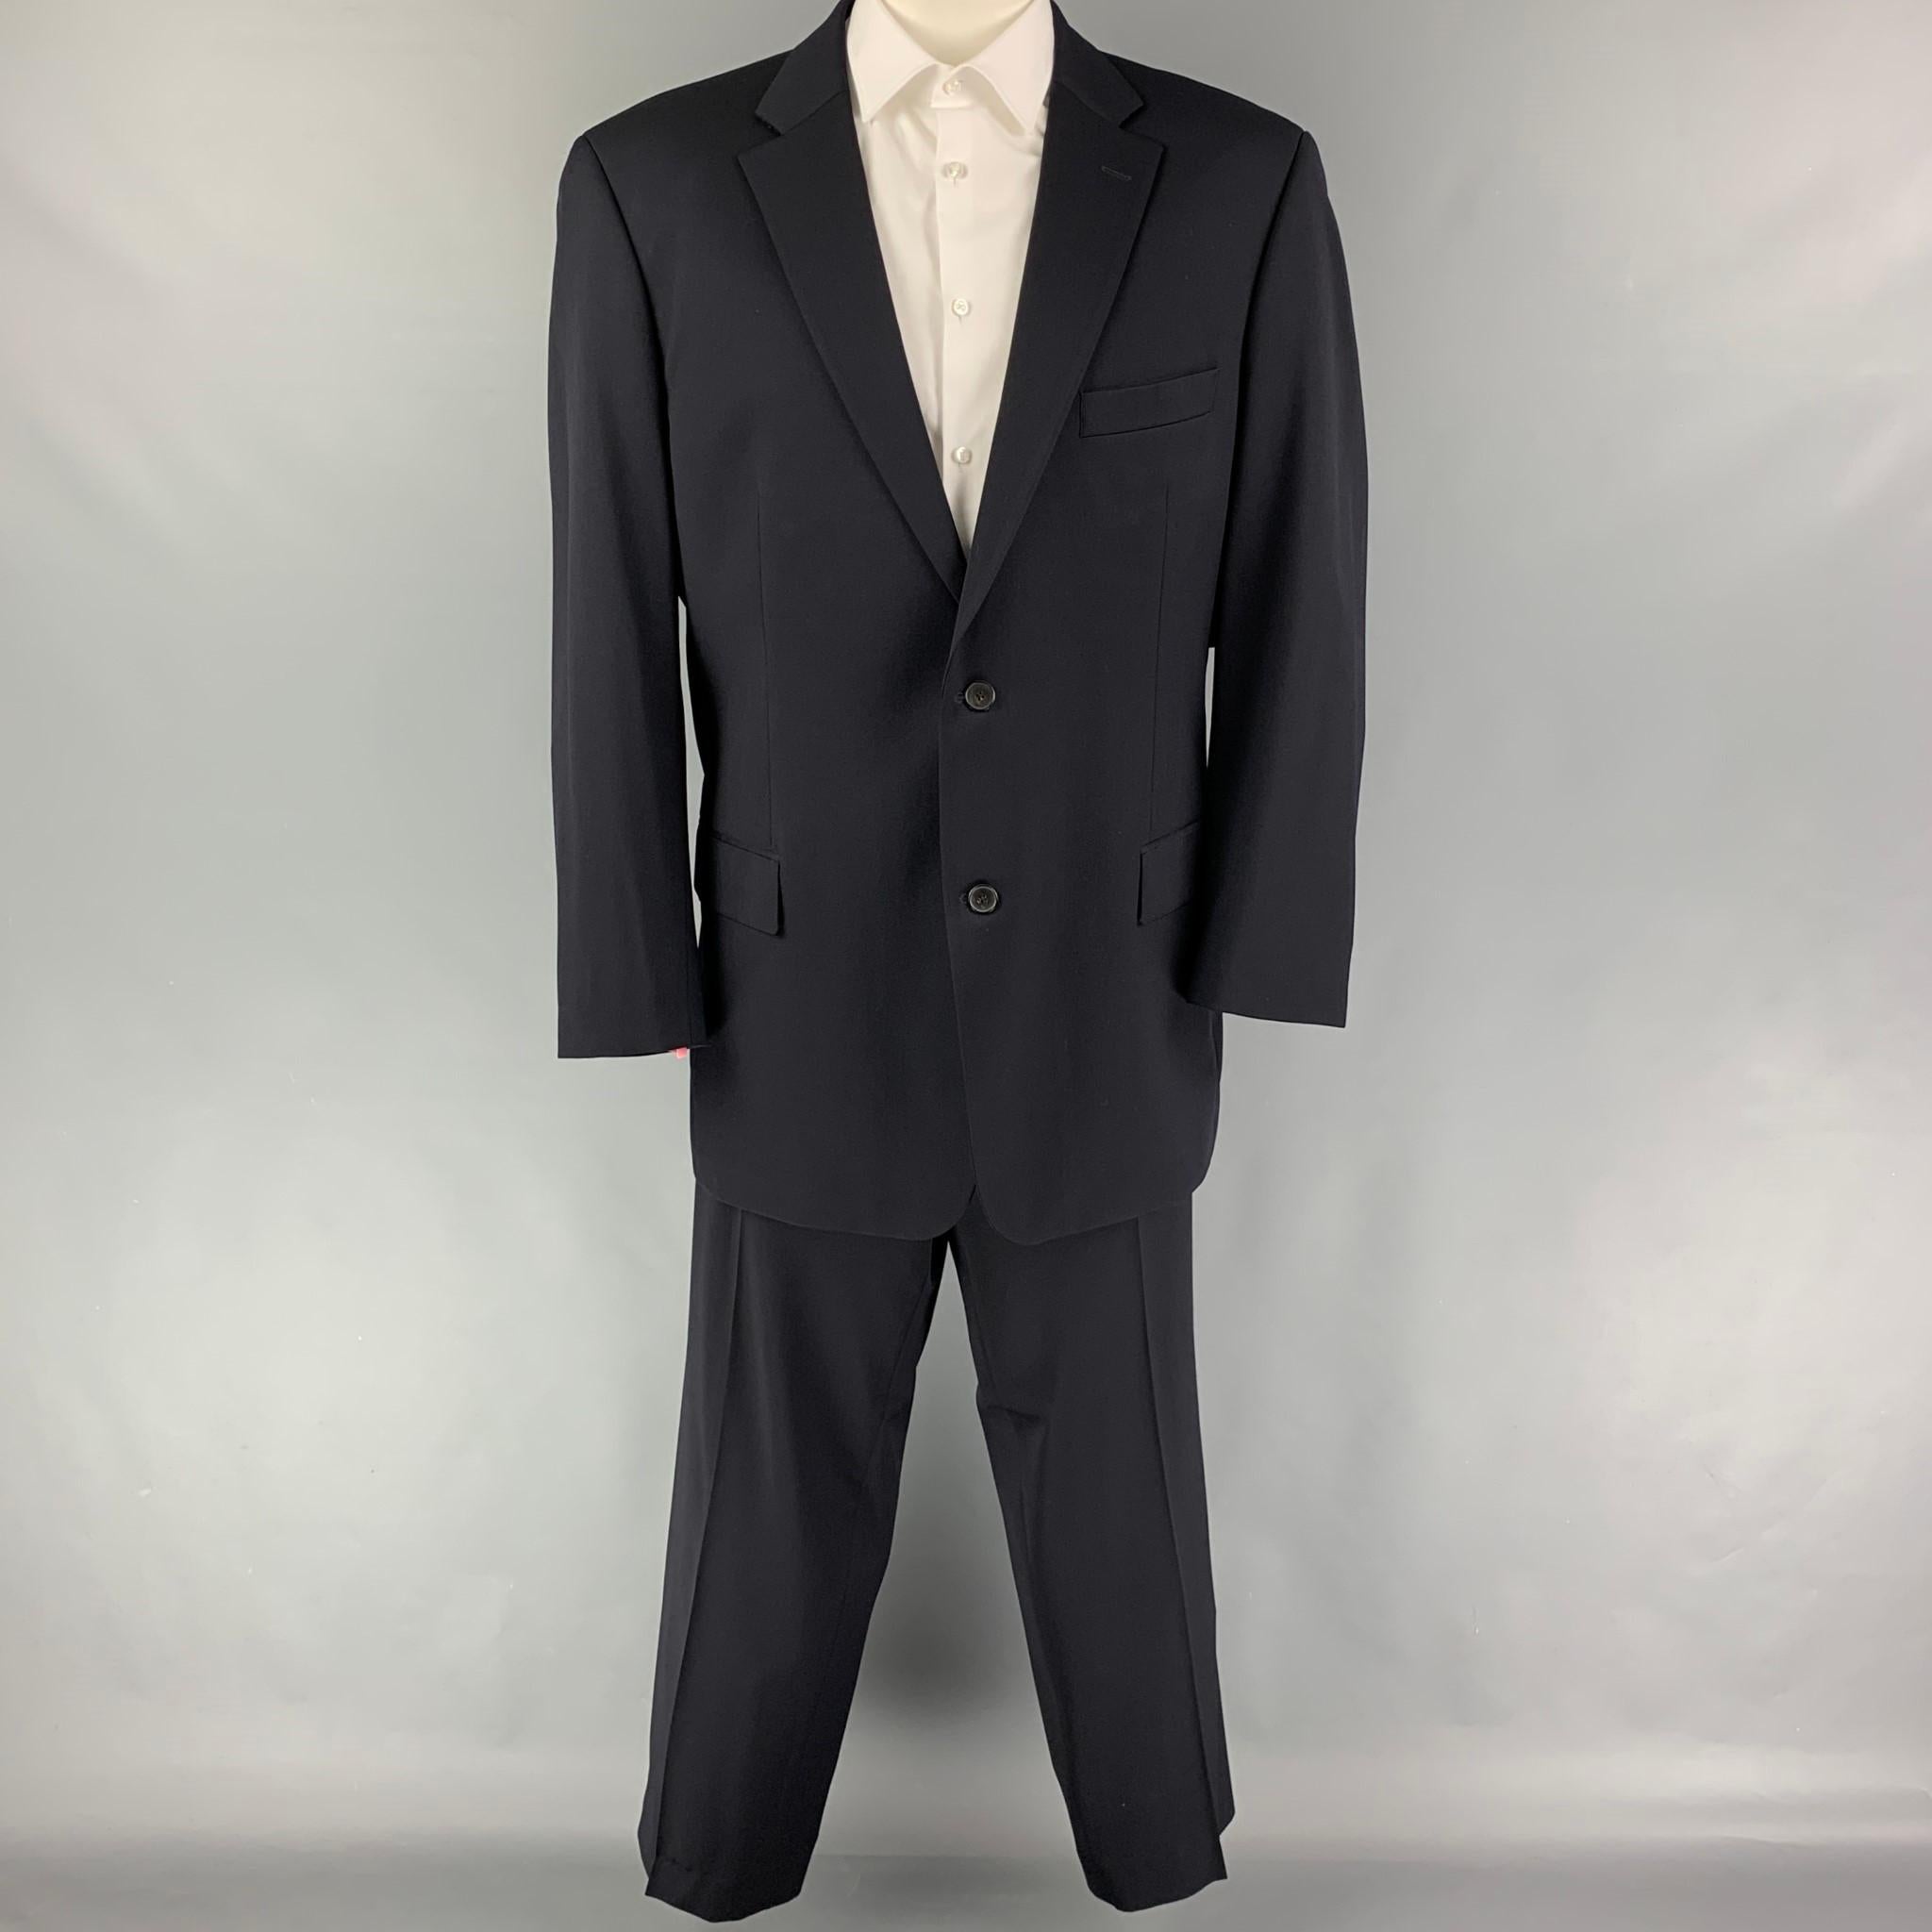 BOSS by HUGO BOSS suit comes in a navy virgin wool with a full liner and includes a single breasted, double button sport coat with a notch lapel and matching flat front trousers.

Very Good Pre-Owned Condition.
Marked: 48